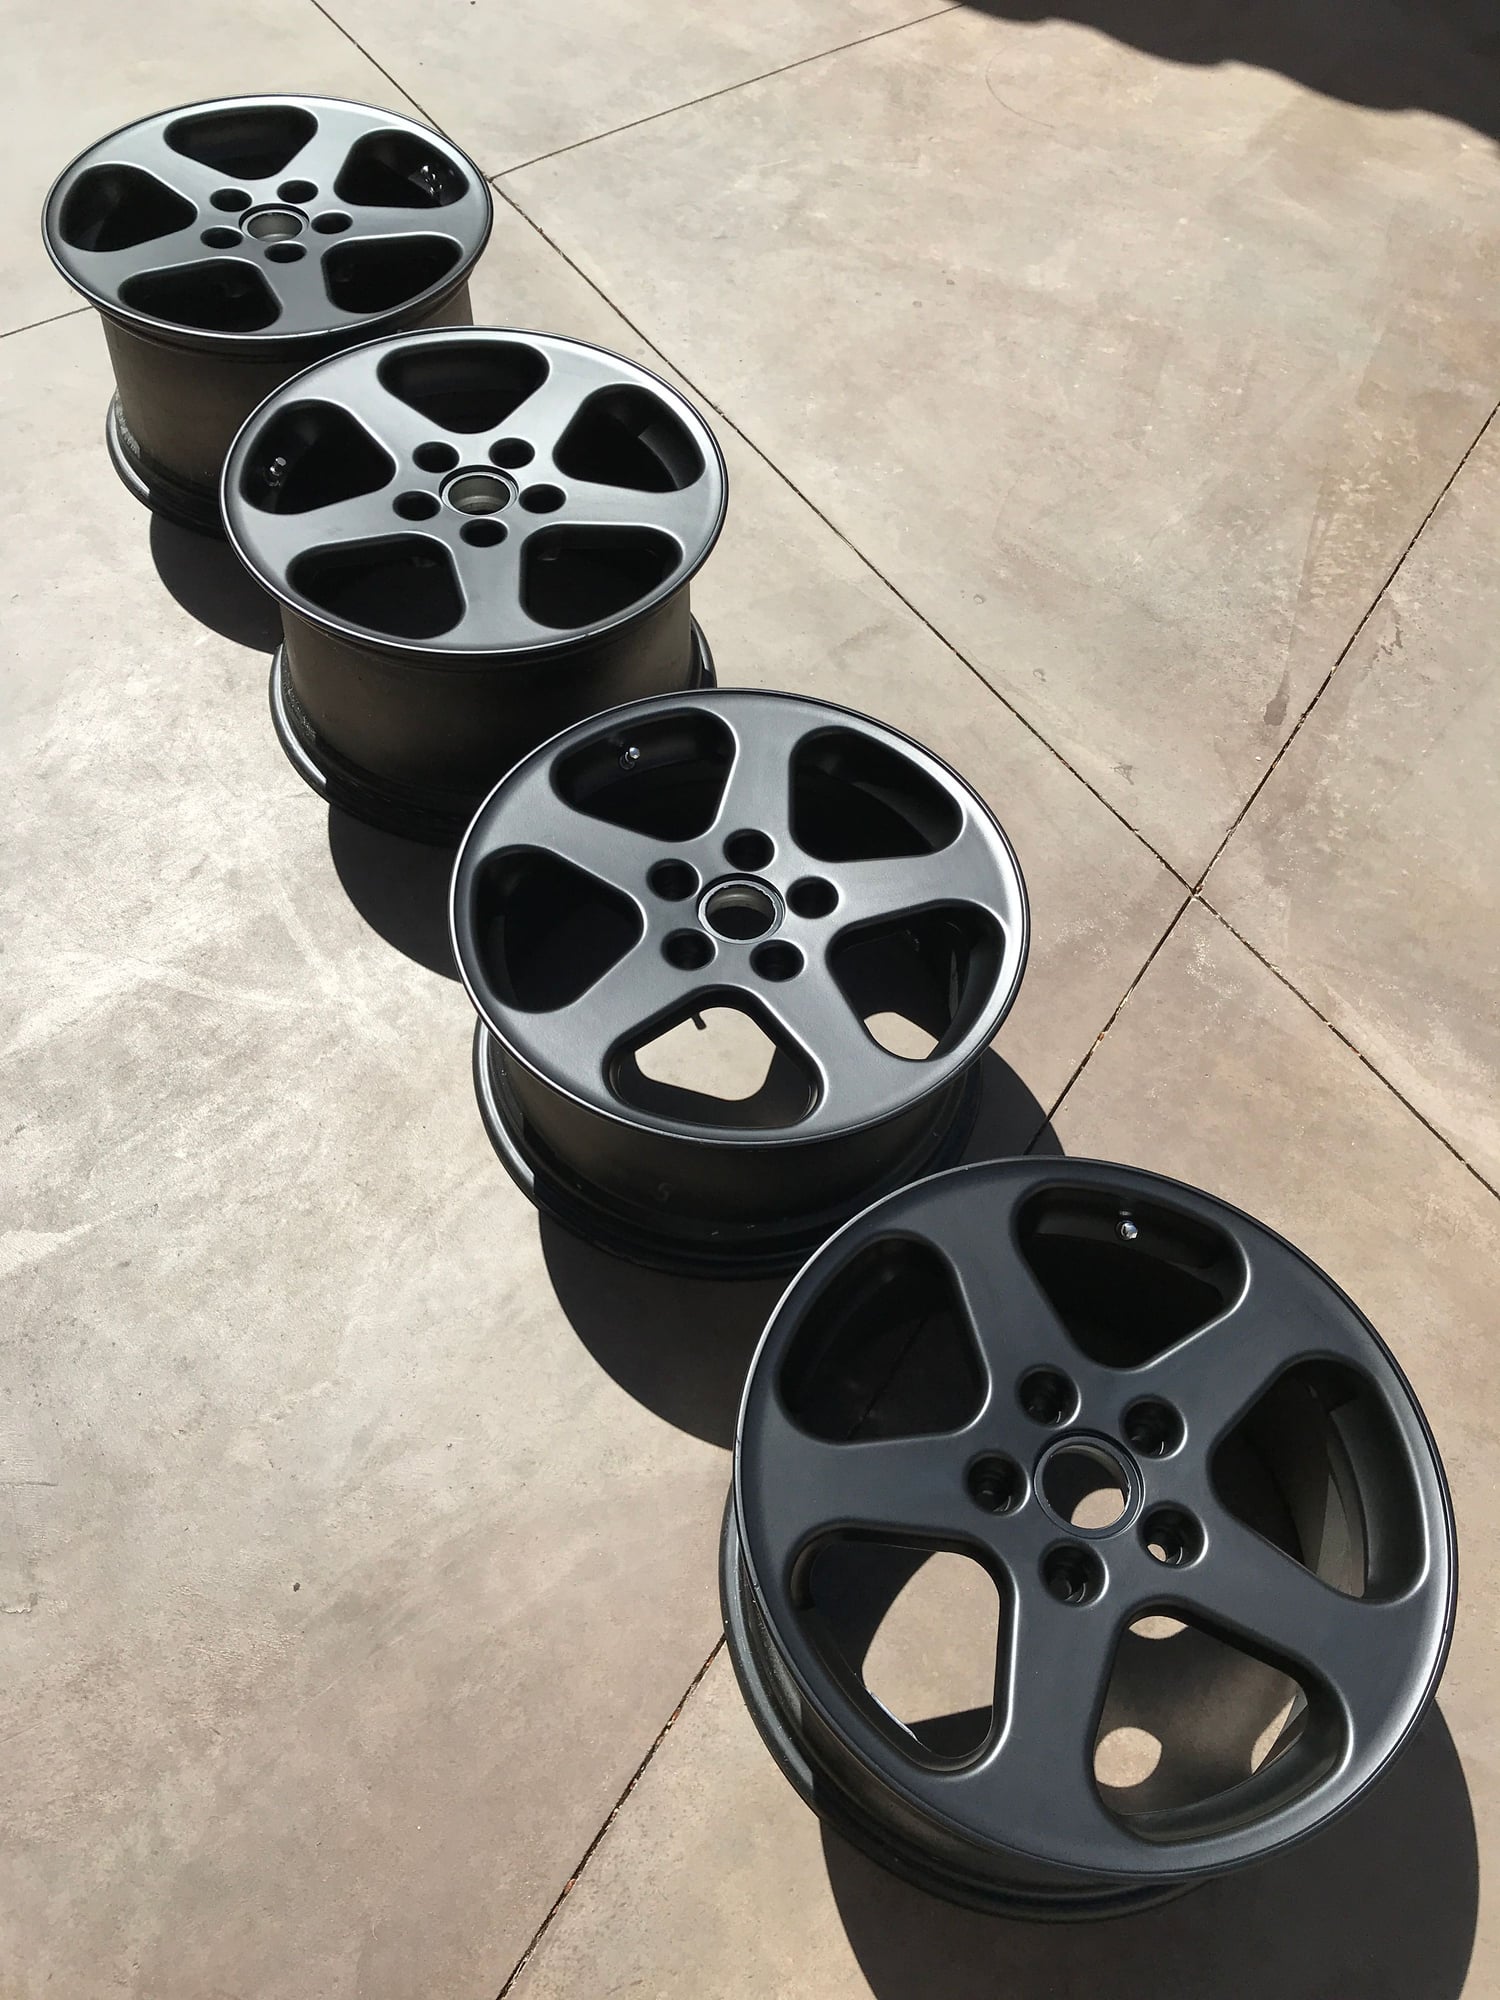 Wheels and Tires/Axles - FS:  RUF 18" Wheel Set in Satin Black - Used - 1990 to 1998 Porsche 911 - Henderson, NV 89074, United States